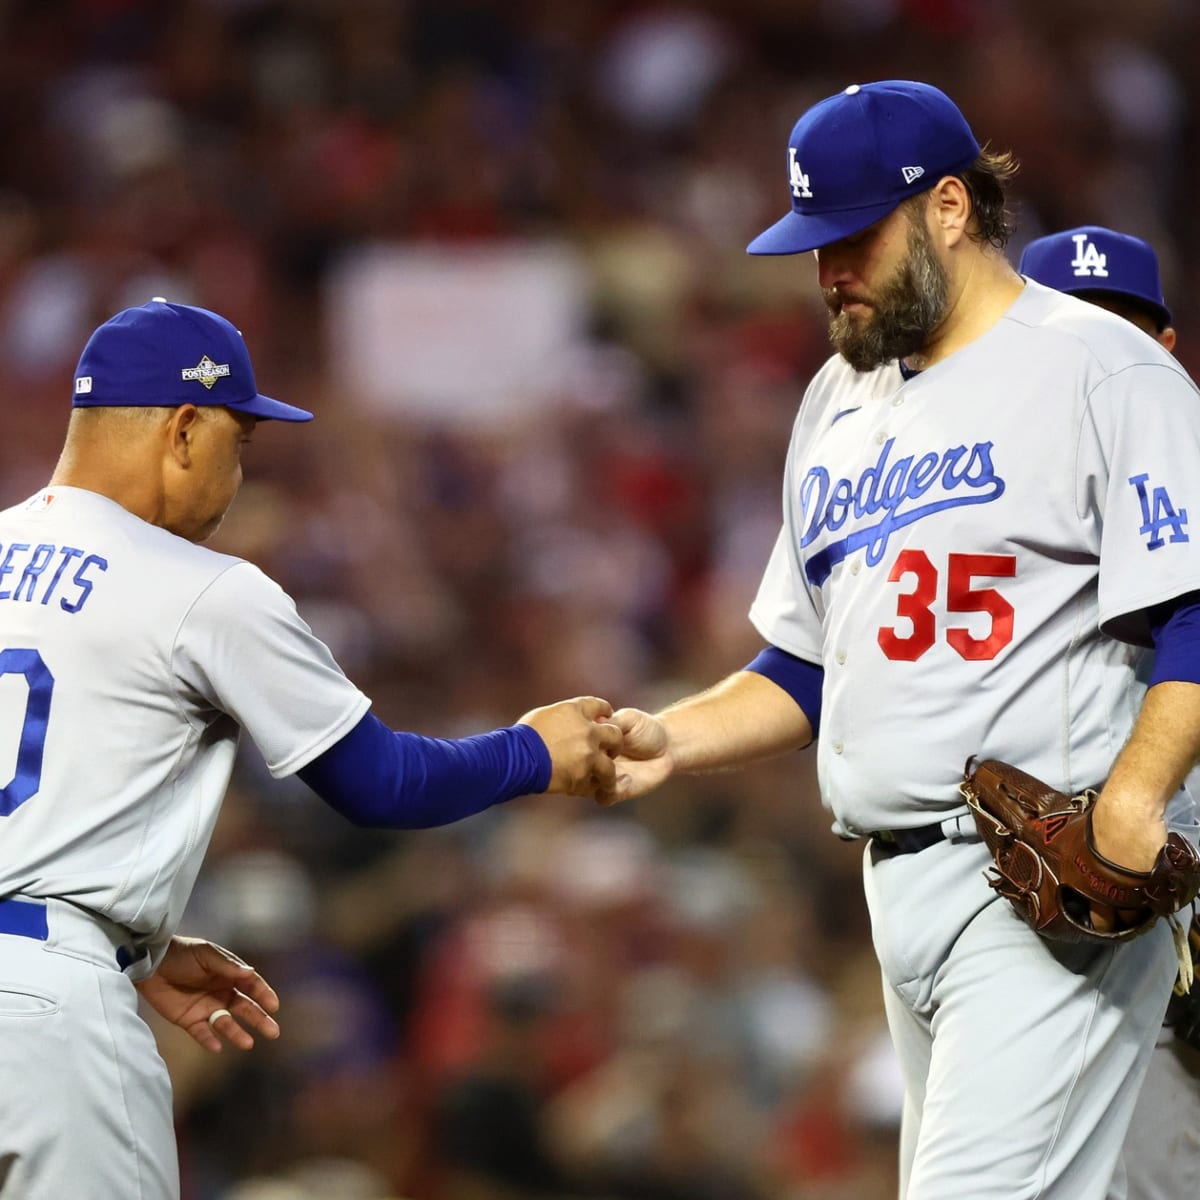 Dodgers Rumors: Joe Kelly Likely Will Be Bought Out Of Contract